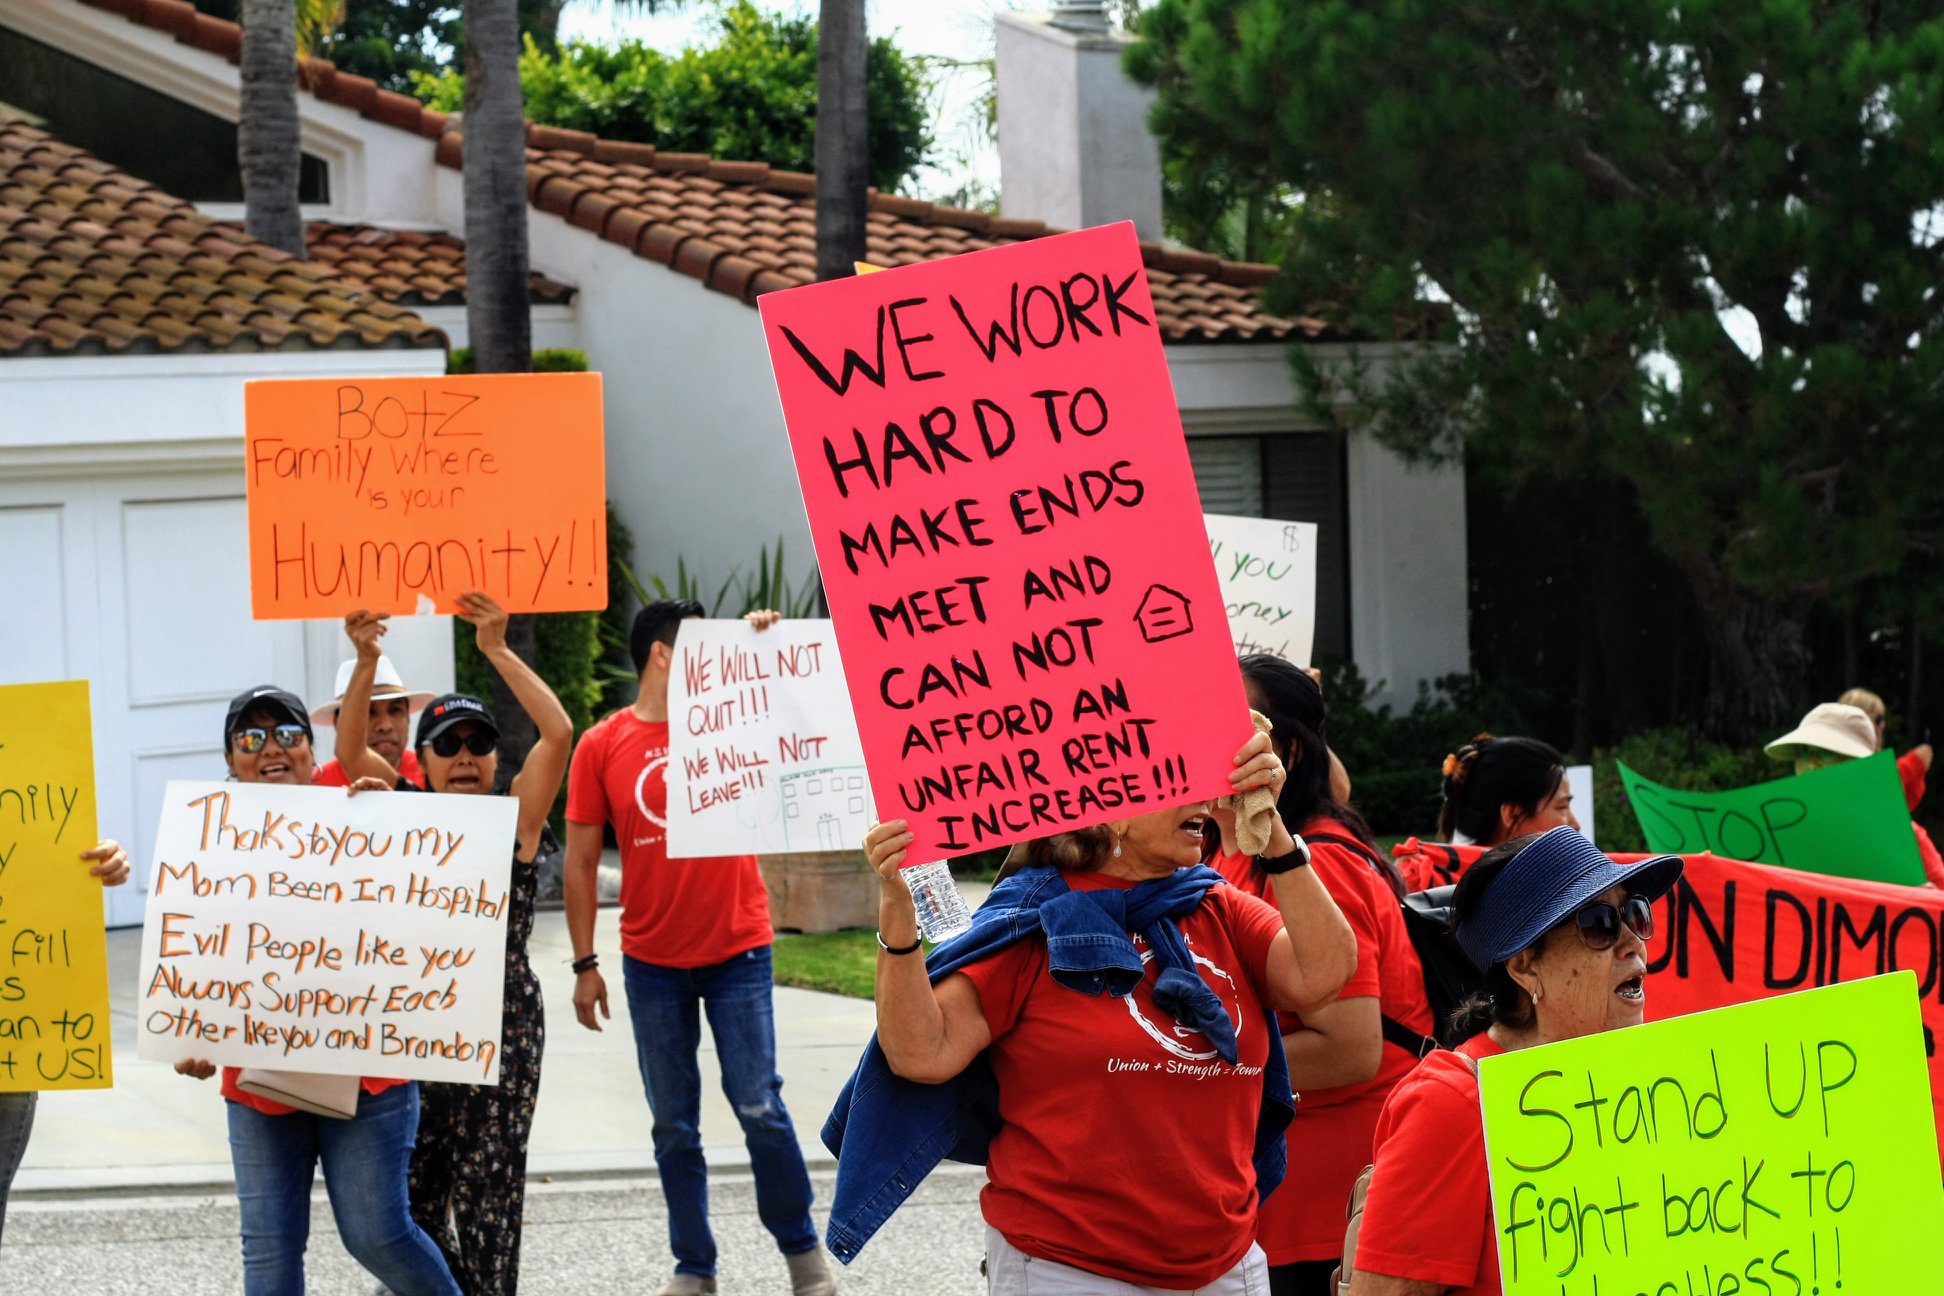 A protester holds a sign reading "WE WORK HARD TO MAKE ENDS MEET AND CAN NOT AFFORD A RENT INCREASE" while surrounded by others also displaying signs of their own